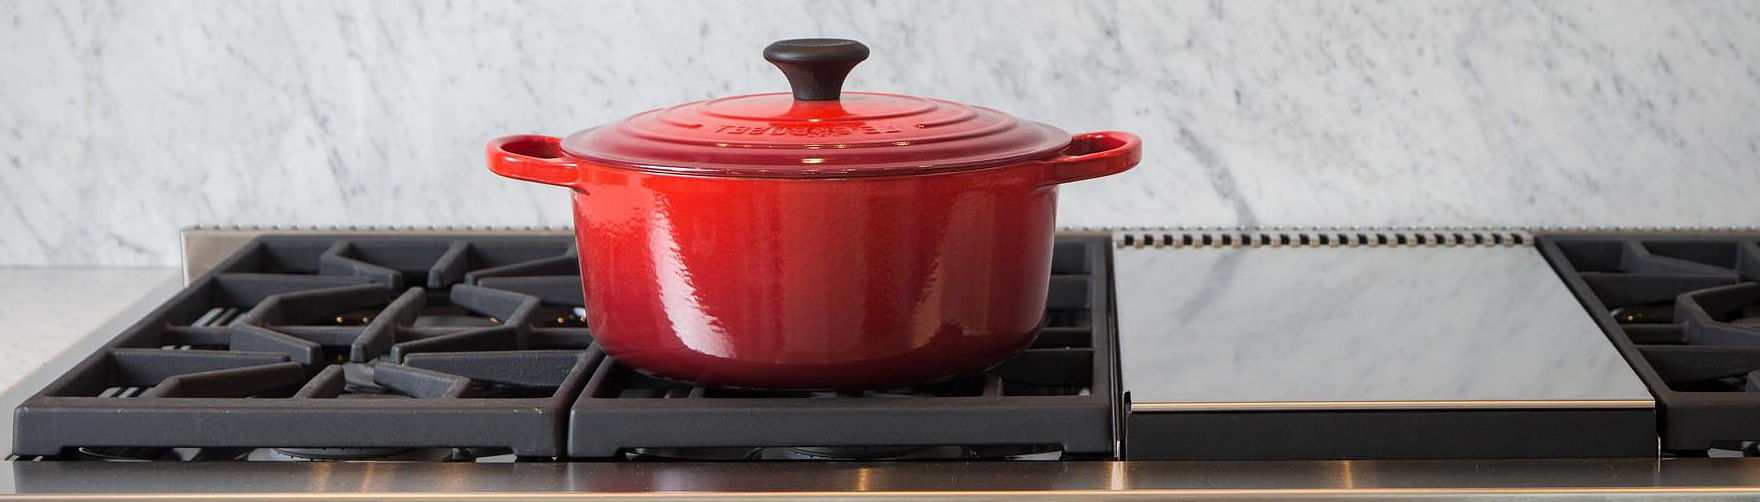 Henstilling under Mars CAN YOU USE A DUTCH OVEN ON THE STOVE? | Glass & Induction